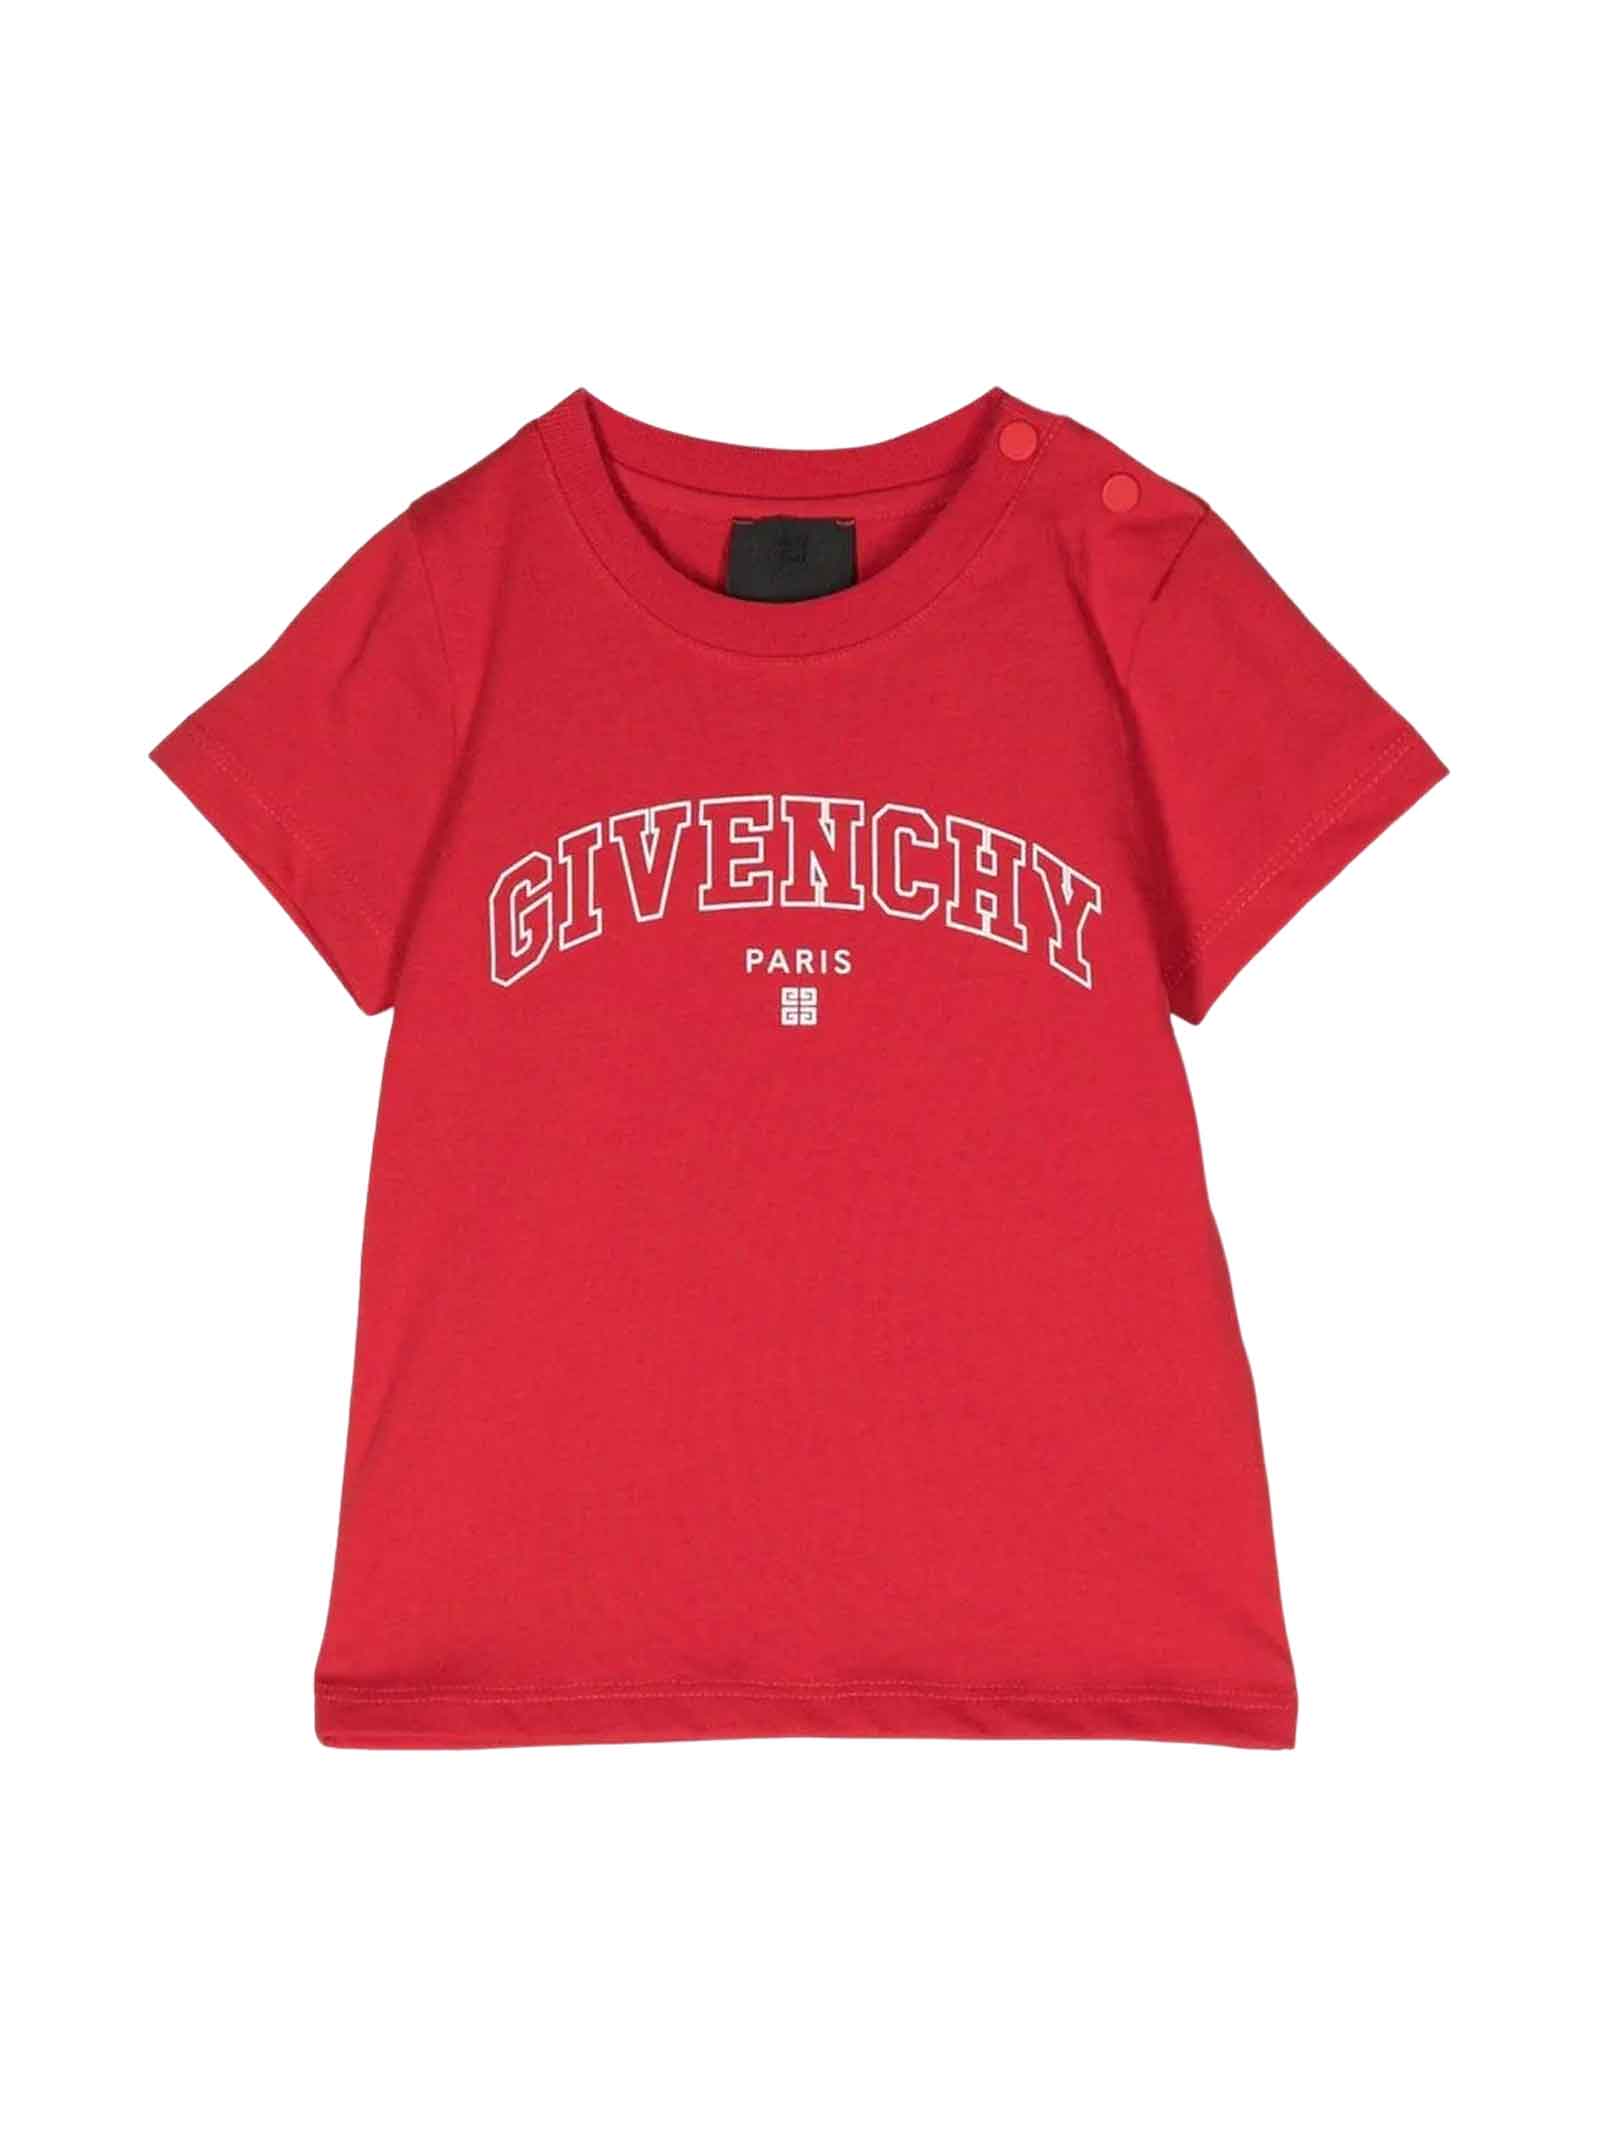 GIVENCHY RED T-SHIRT BABY BOY